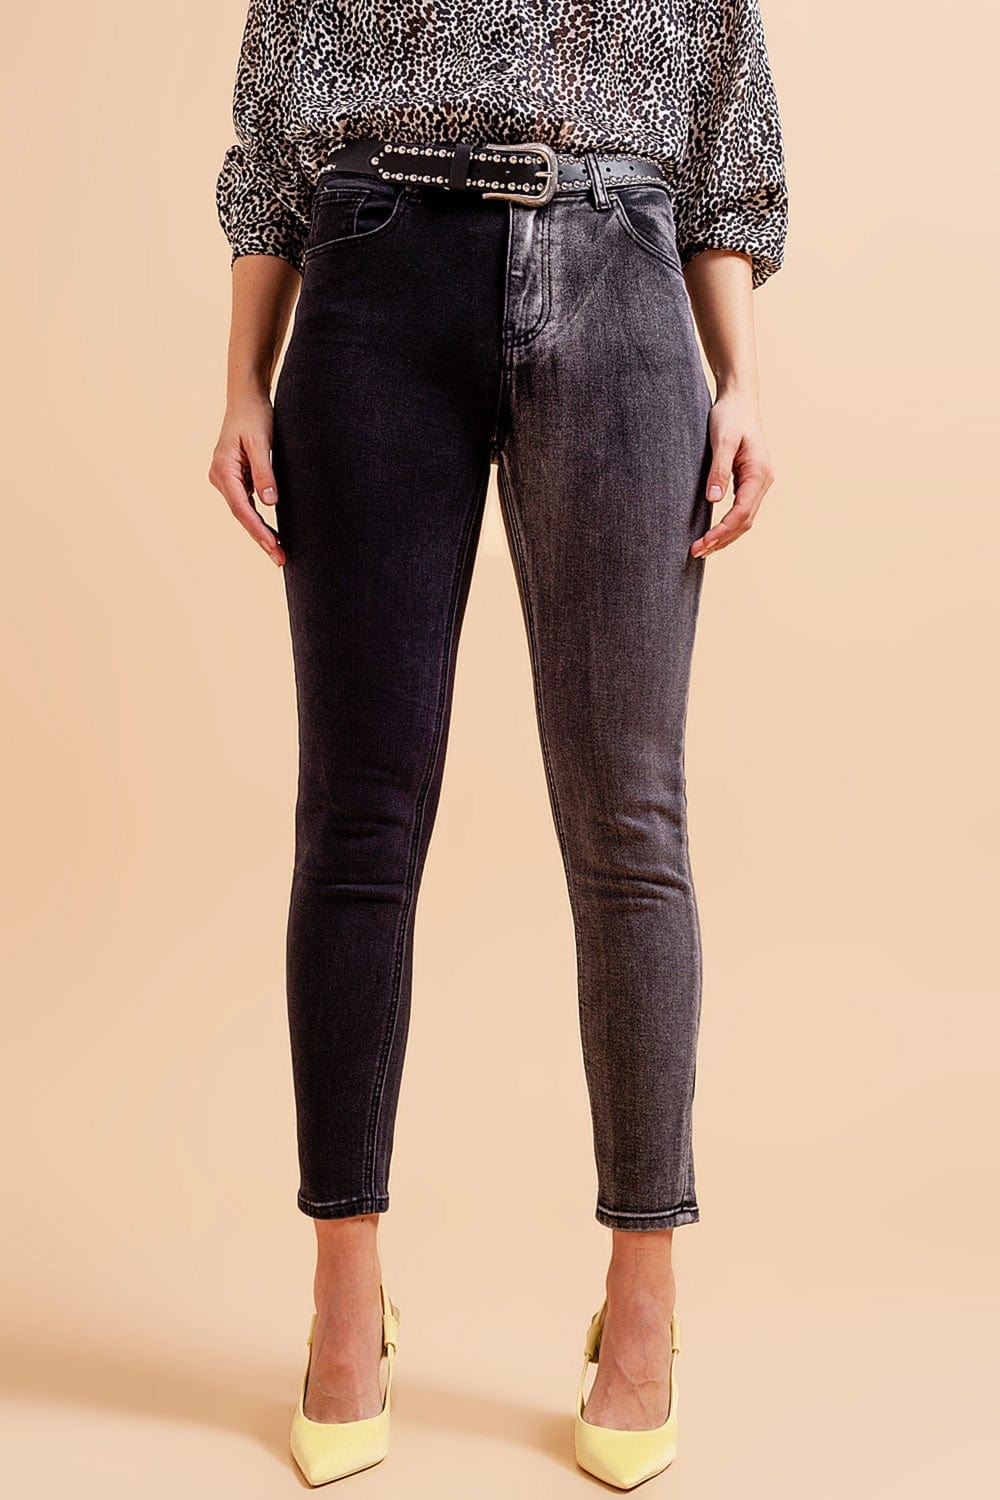 Q2 Women's Jean Jeans in Color Block Grey and Black